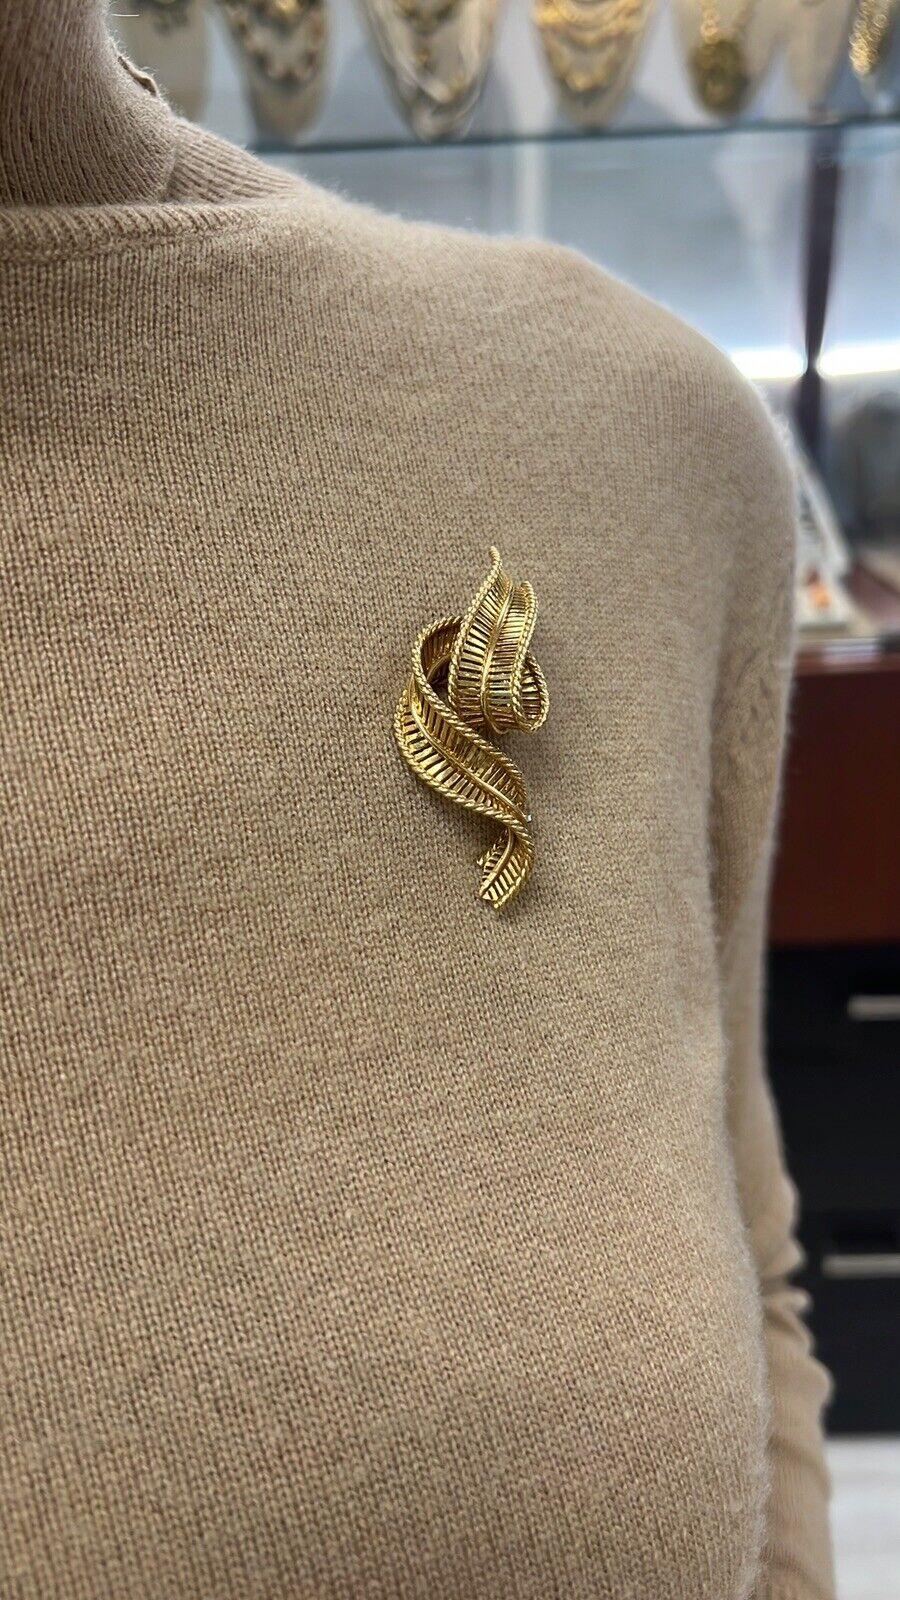 Hermes Paris 18k Yellow Gold Swirl Brooch Fully Hallmarked

Here is your chance to purchase a beautiful and highly collectible designer brooch / clip.   

The length is 2 3/8 inches.  The width is 1 inch.  The weight is 18.5 grams.  The brooch is